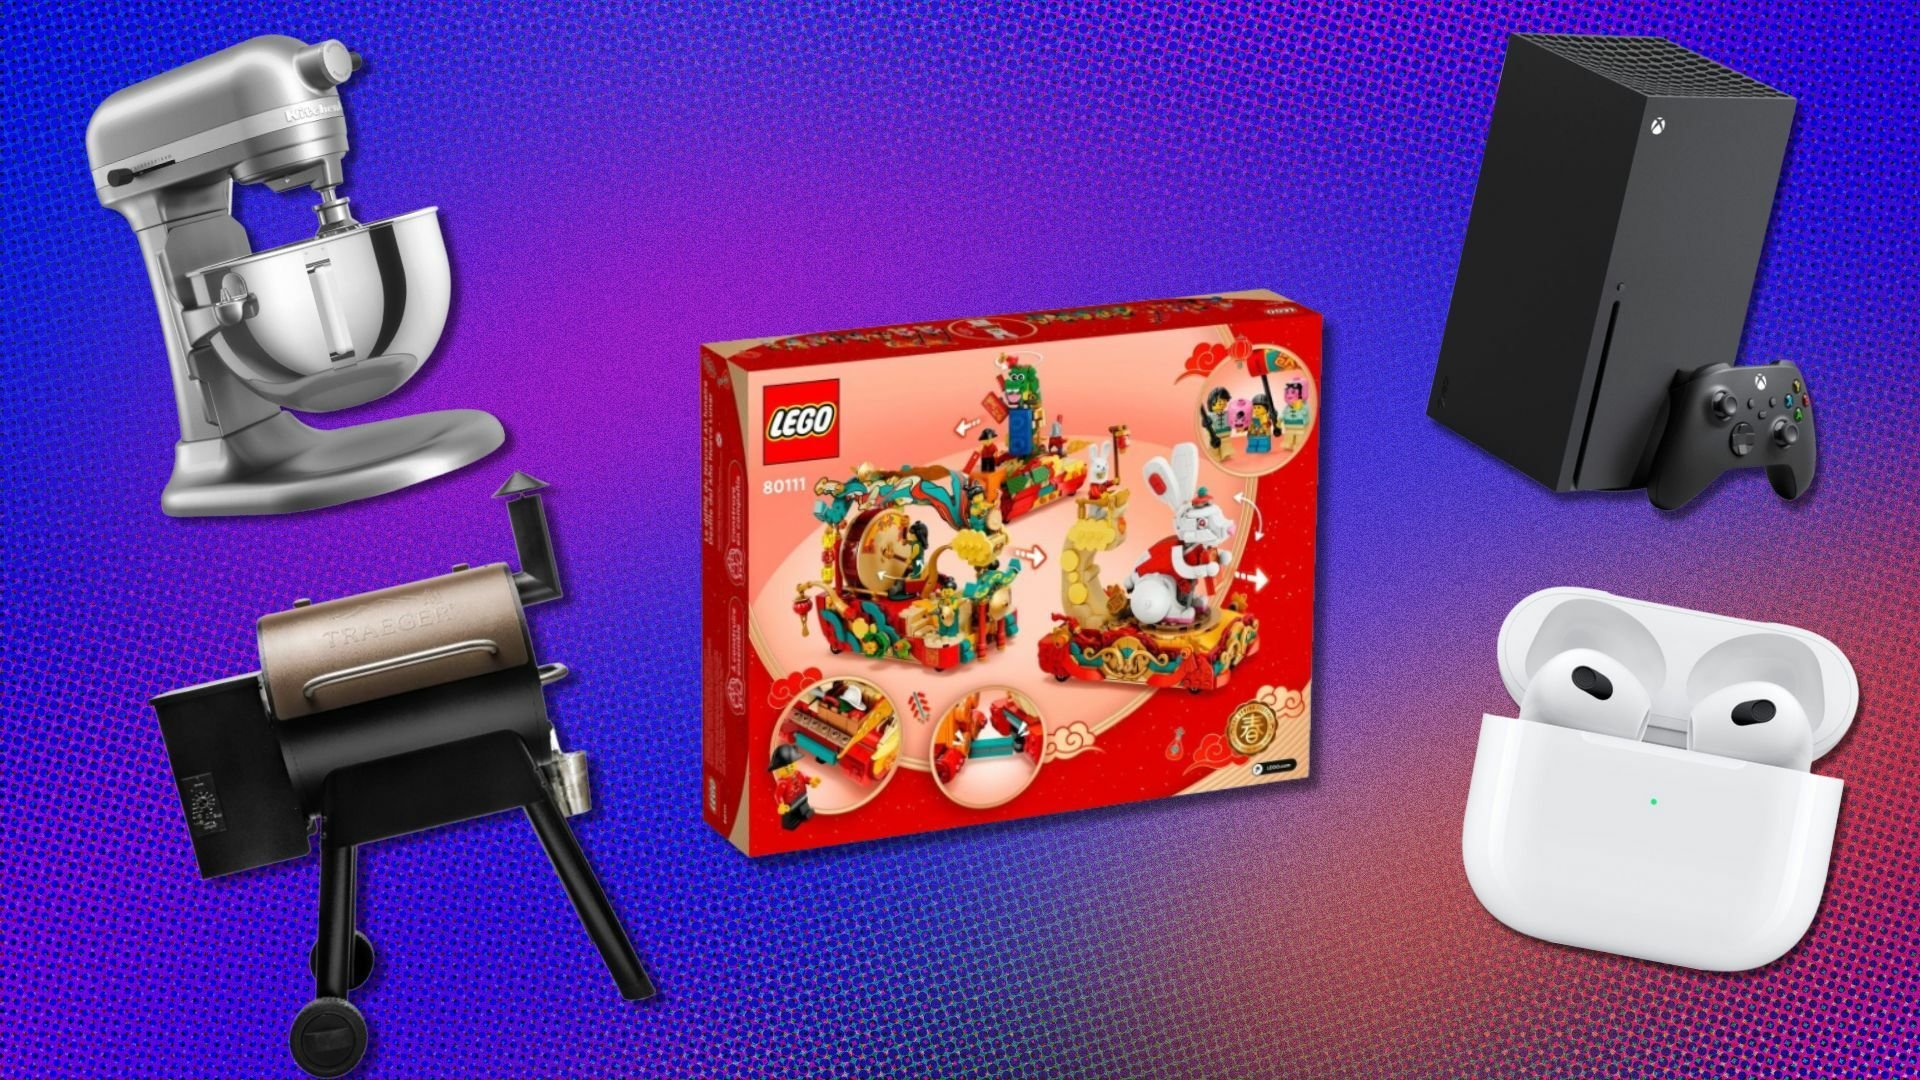 a purple background with several items including a Lego set, a KitchenAid mixer, AirPods, and an Xbox console